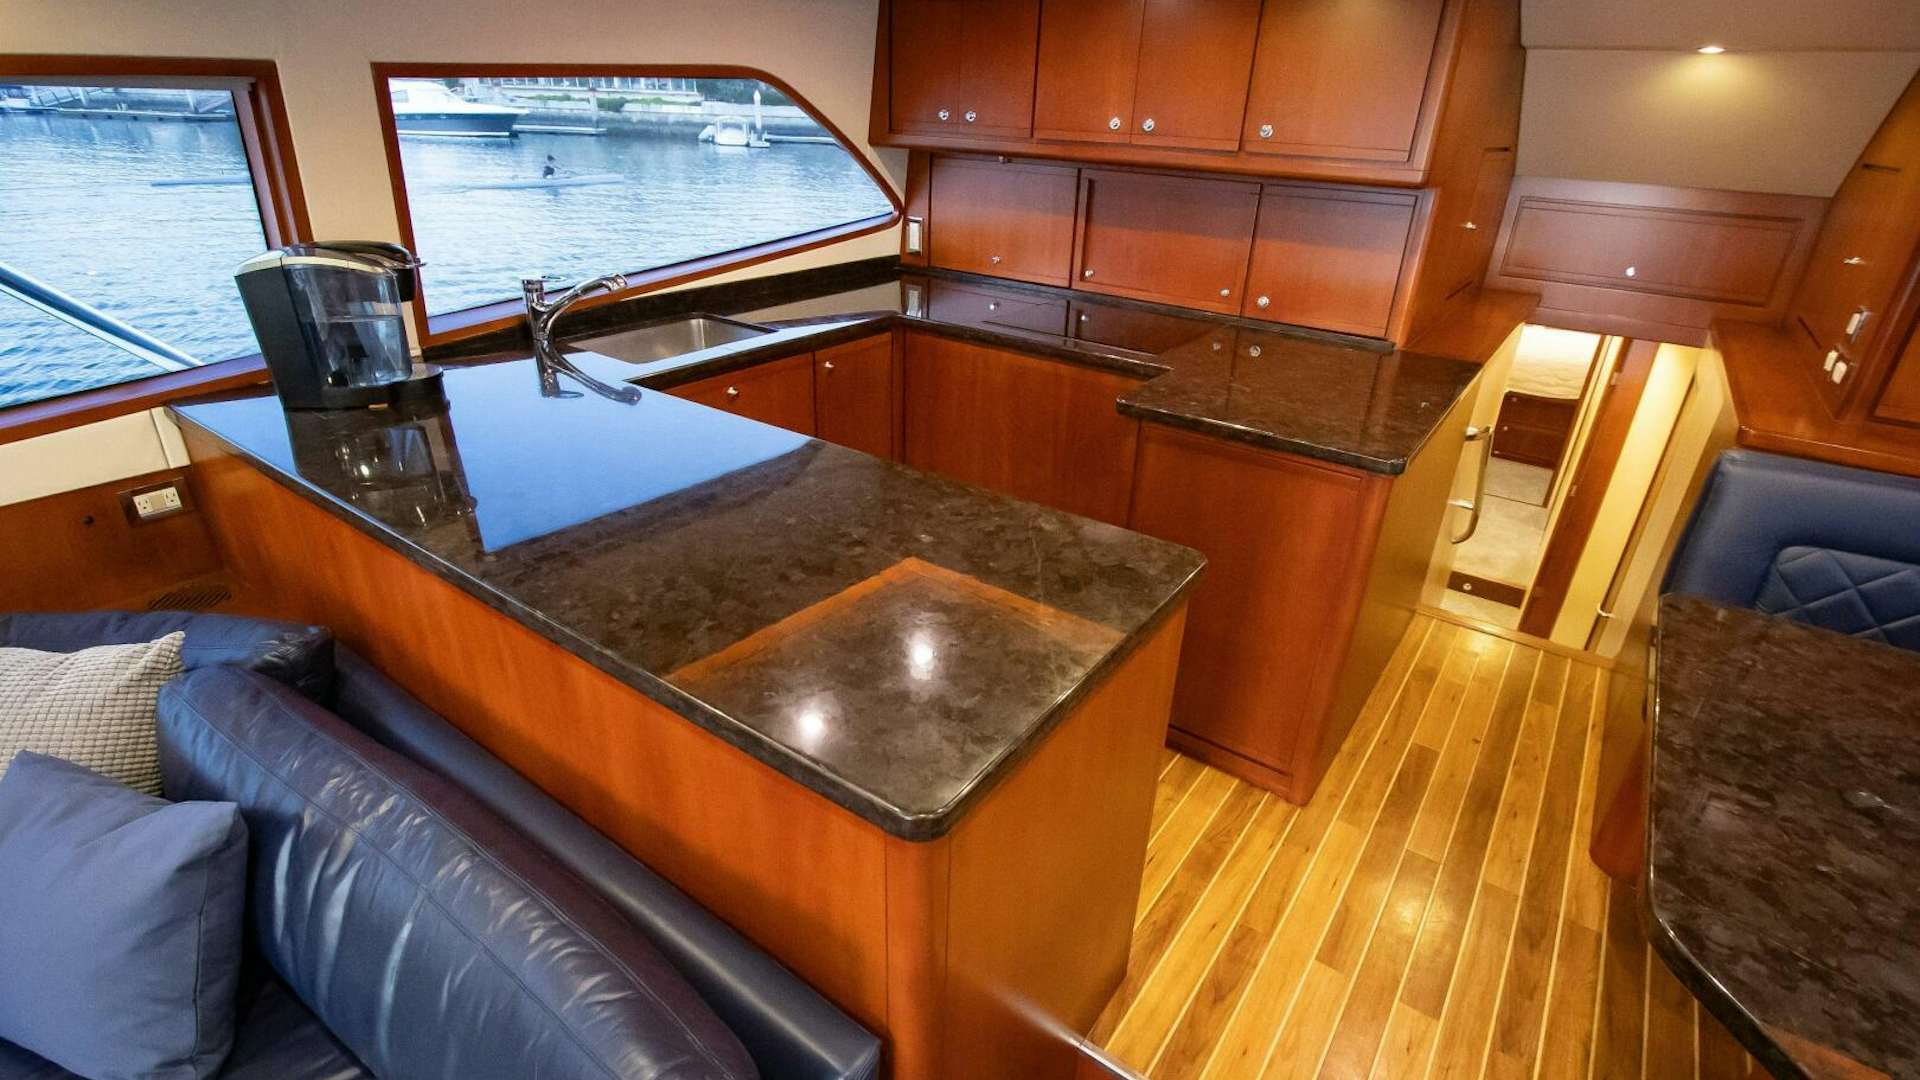 Valkyrie
Yacht for Sale